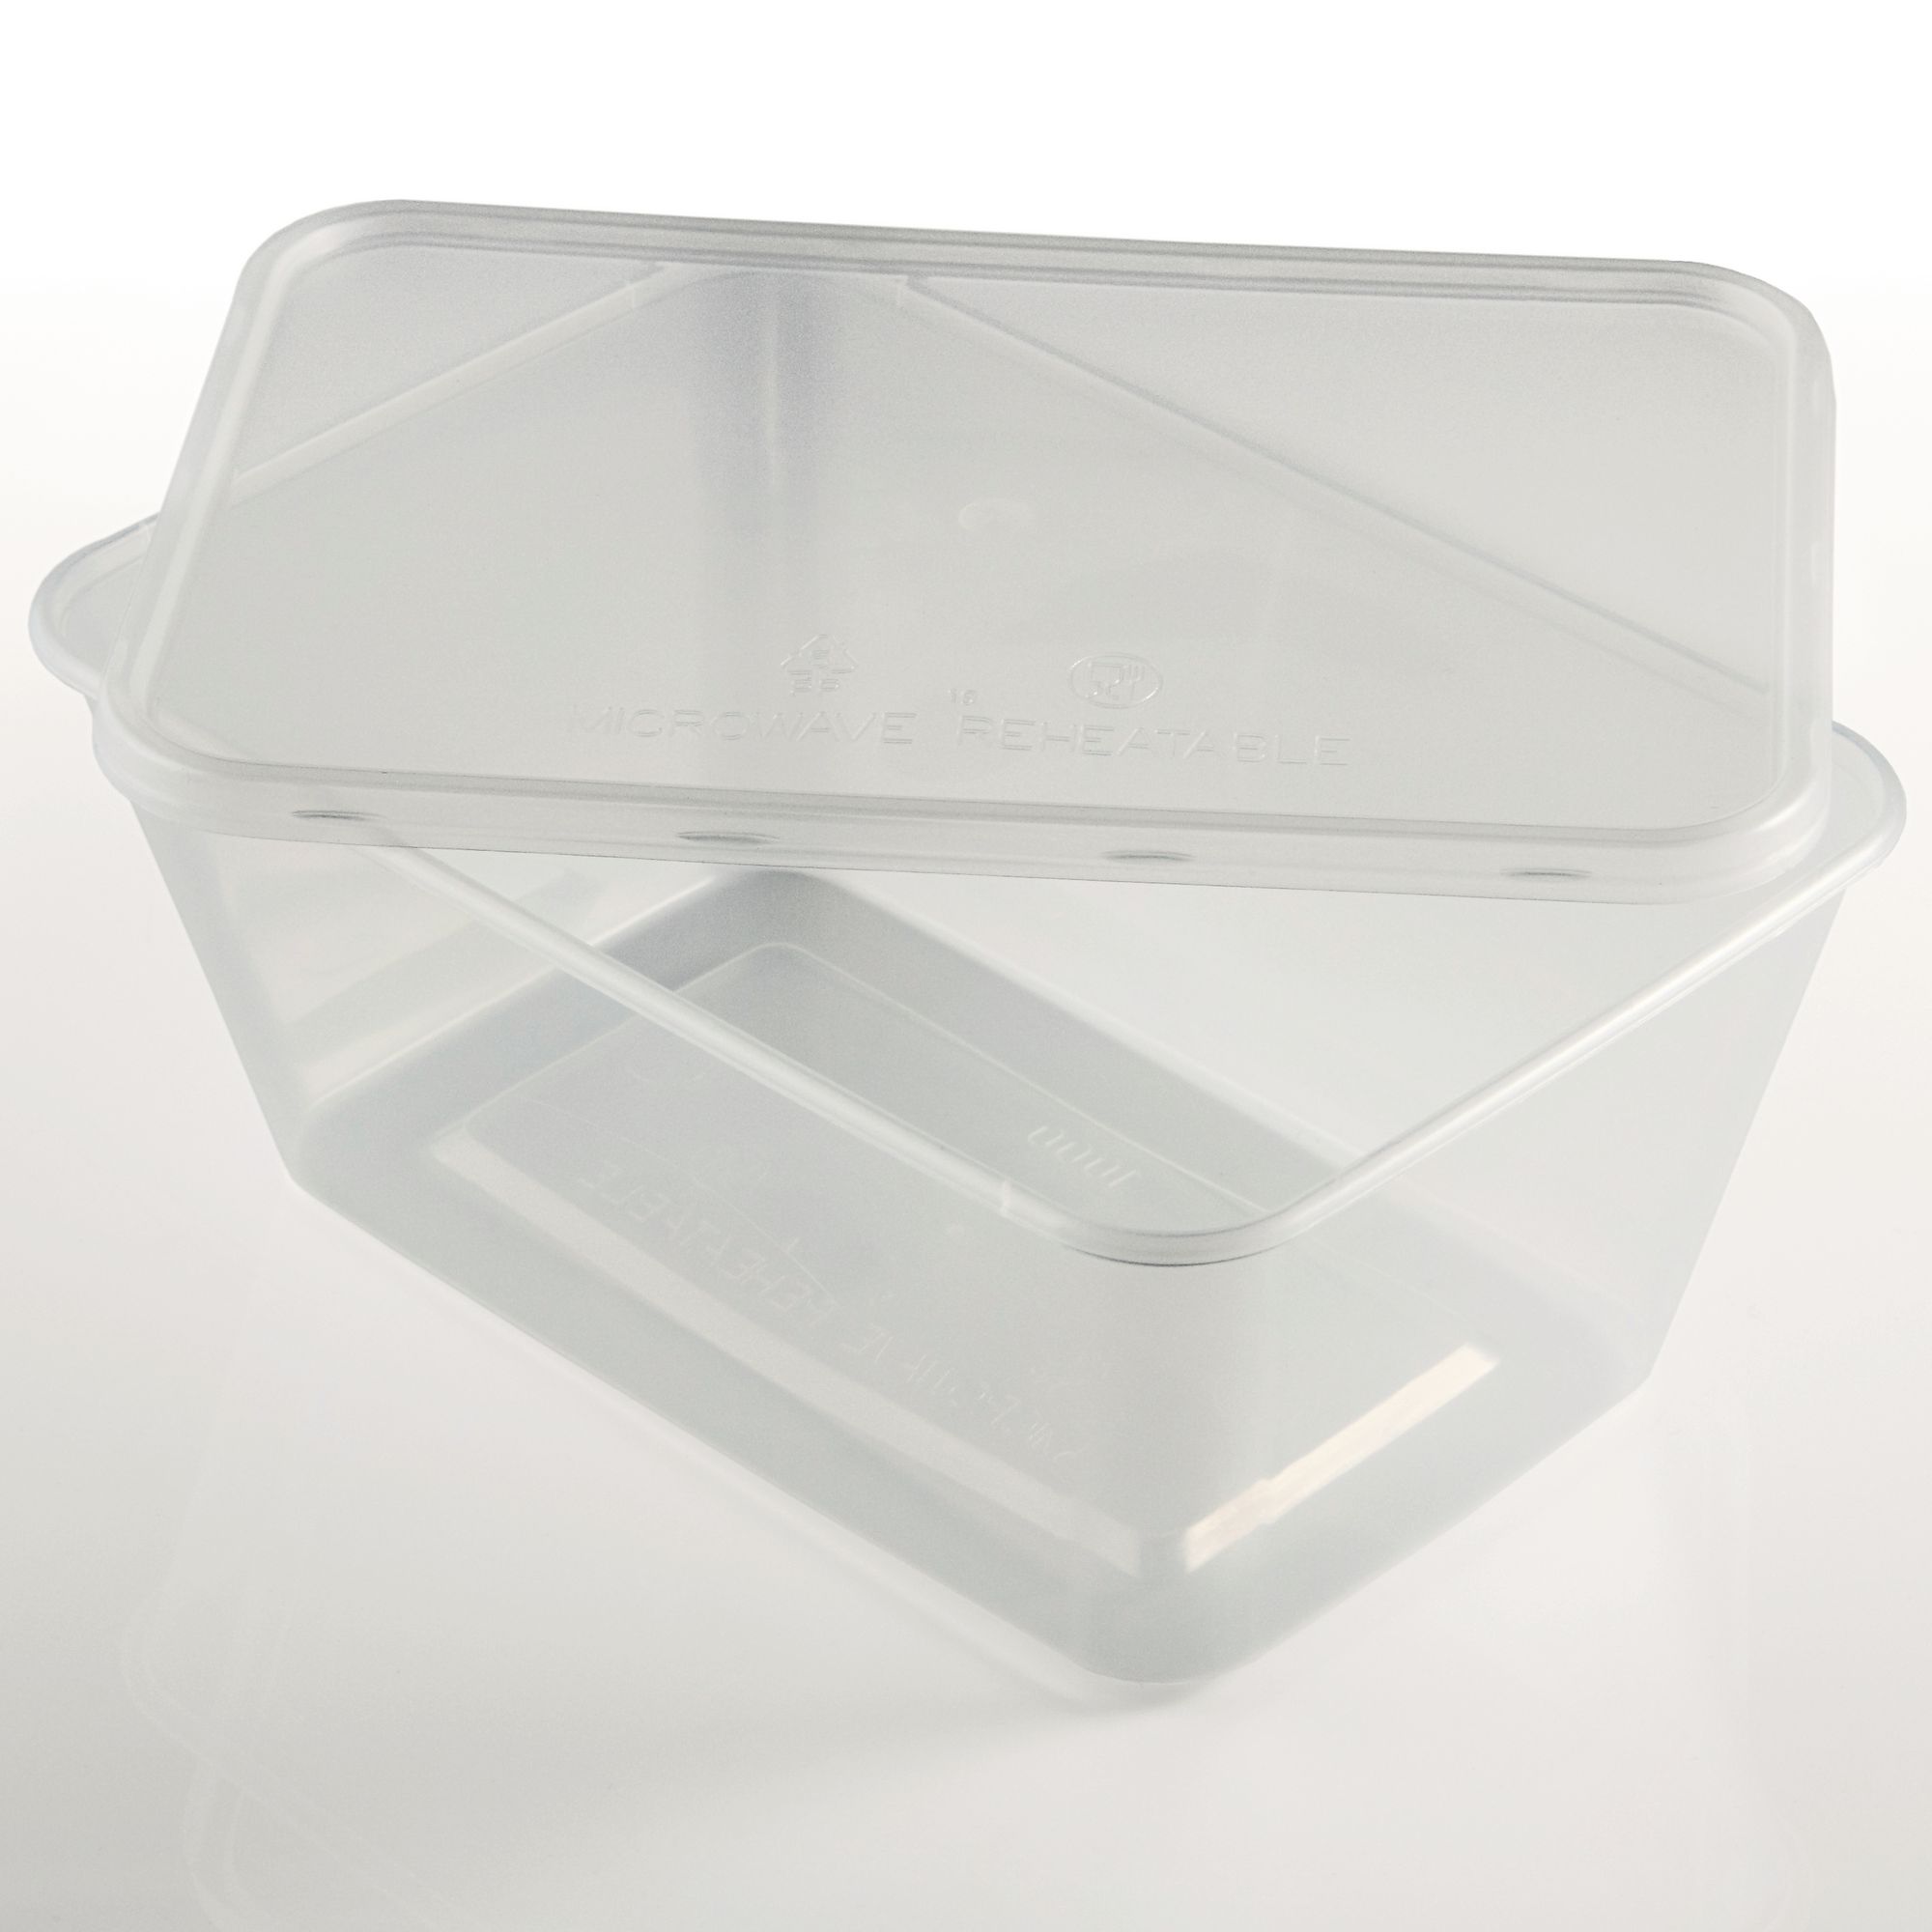 Microwave Containers - 1 litre - G267819 | GLS Educational Supplies